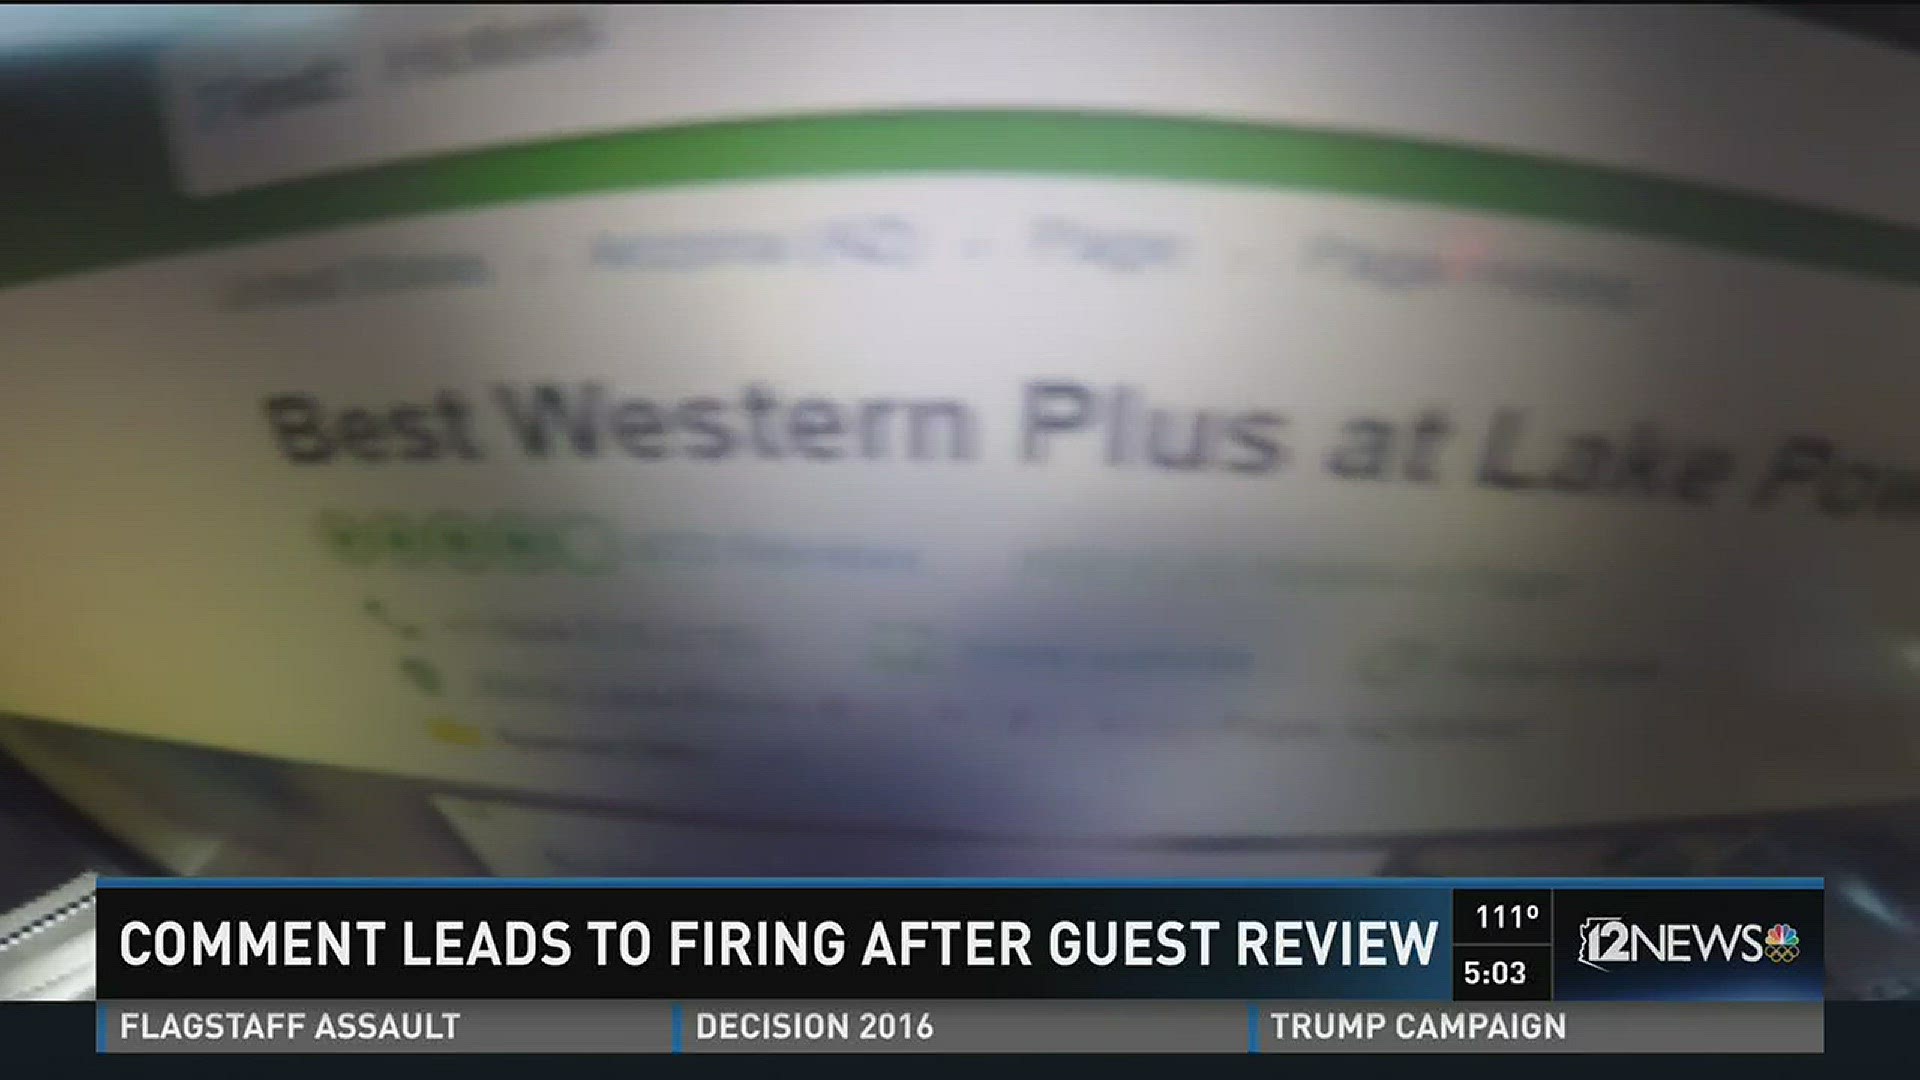 An online review on TripAdvisor leads to an insulting reply that later results in firing.